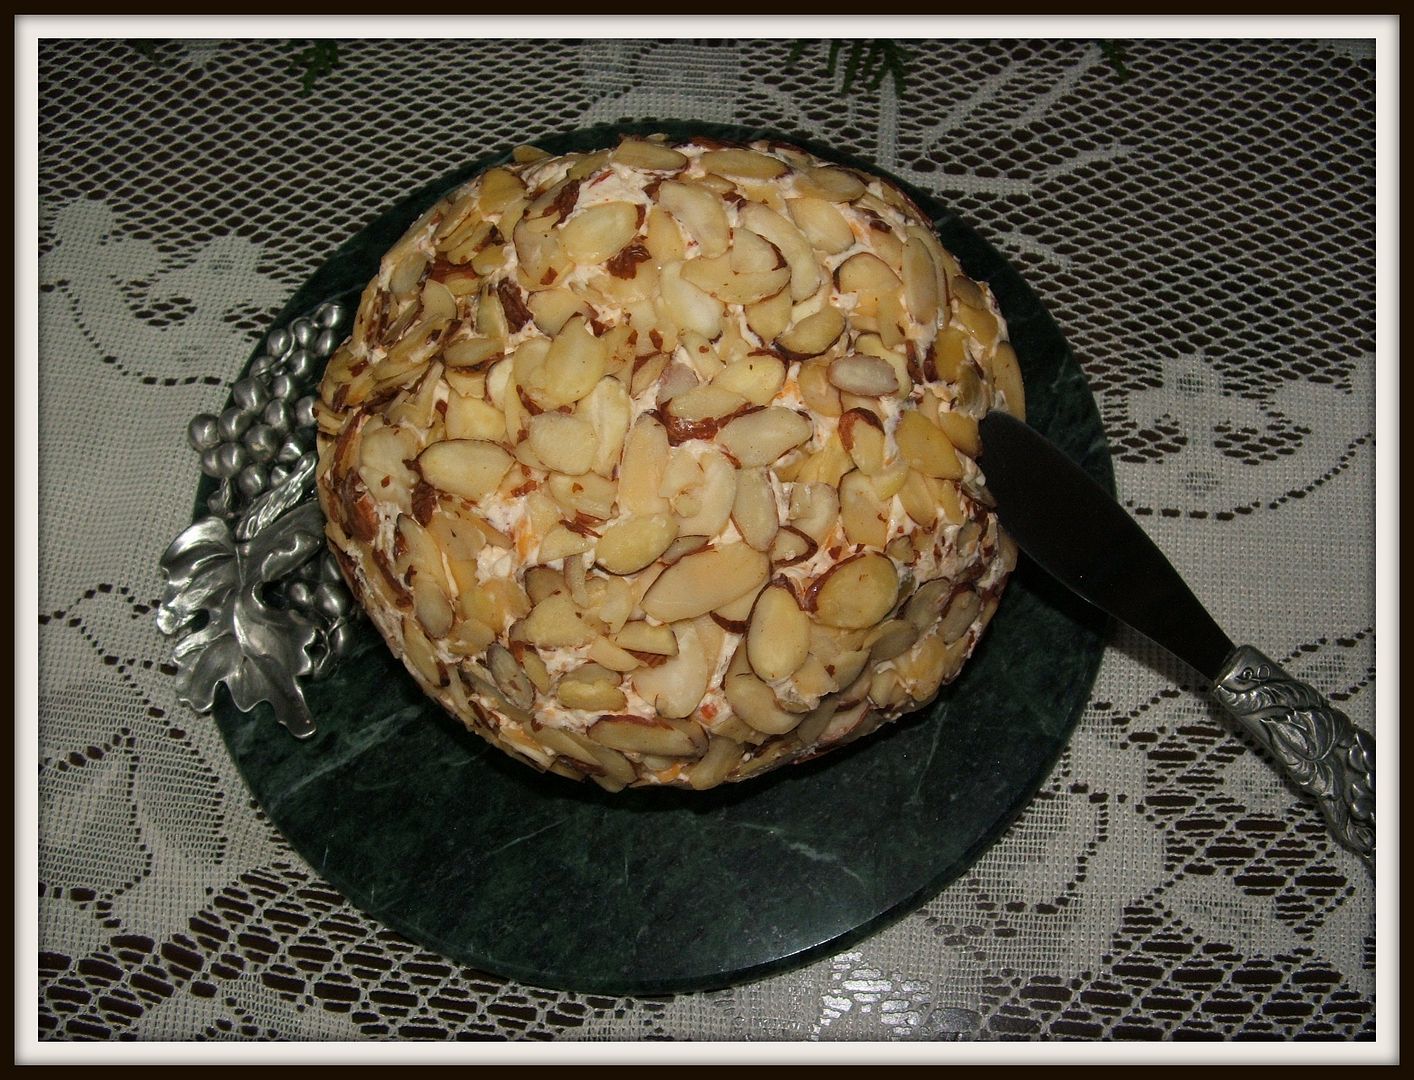 Cheeseball by Angie Ouellette-Tower for godsgrowinggarden.com photo 006_zps7bbf7c75.jpg